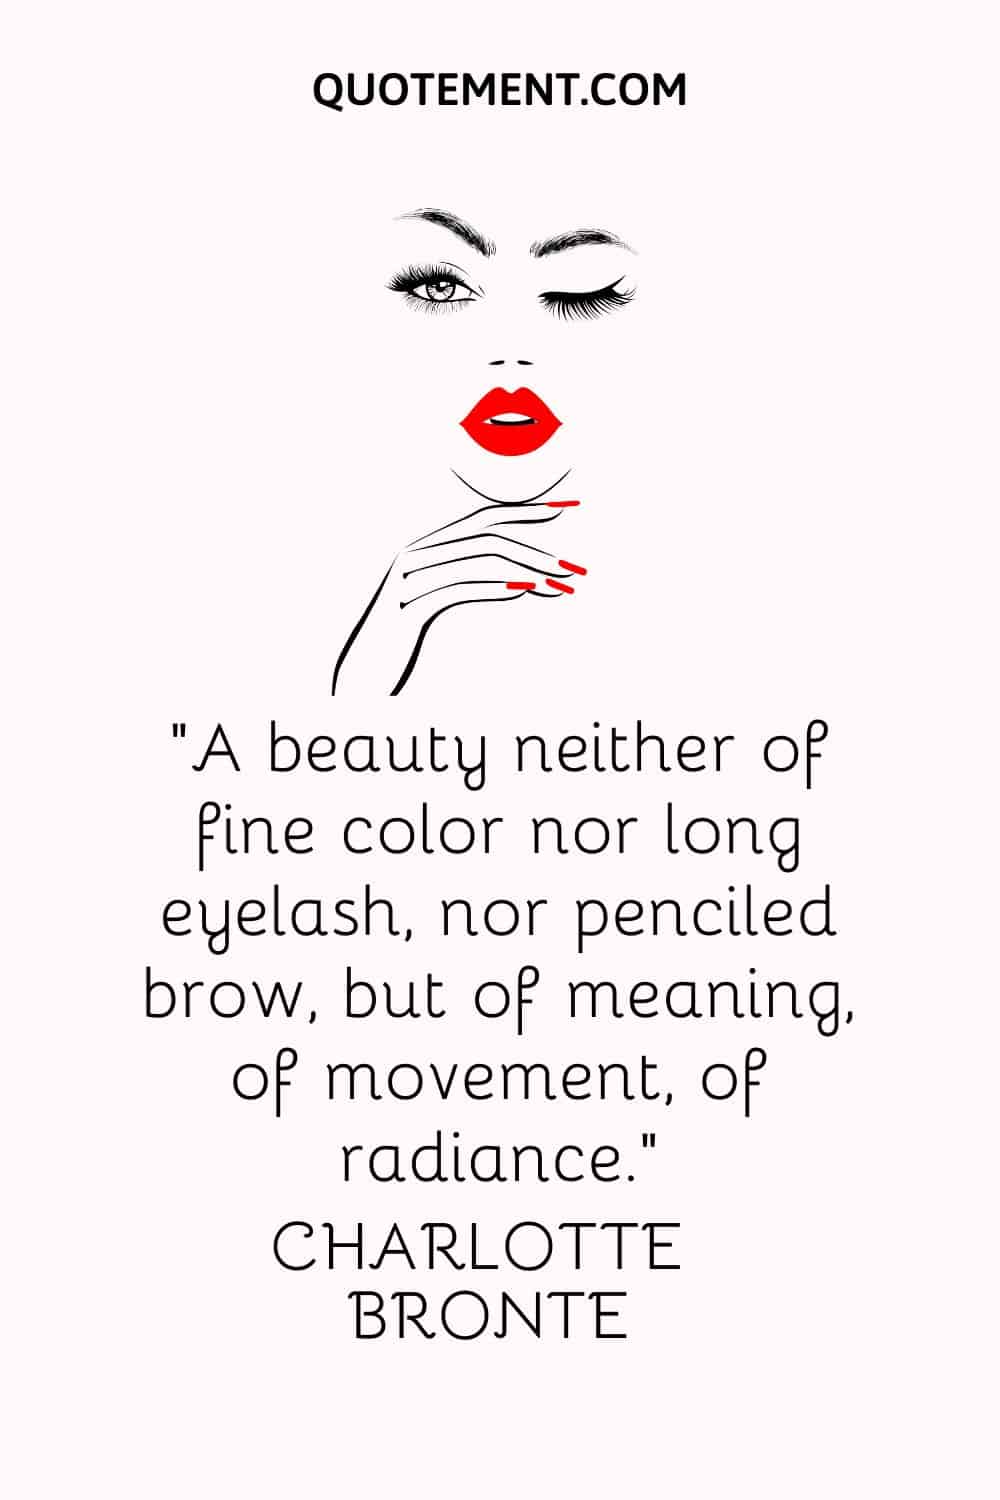 A beauty neither of fine color nor long eyelash, nor penciled brow, but of meaning, of movement, of radiance